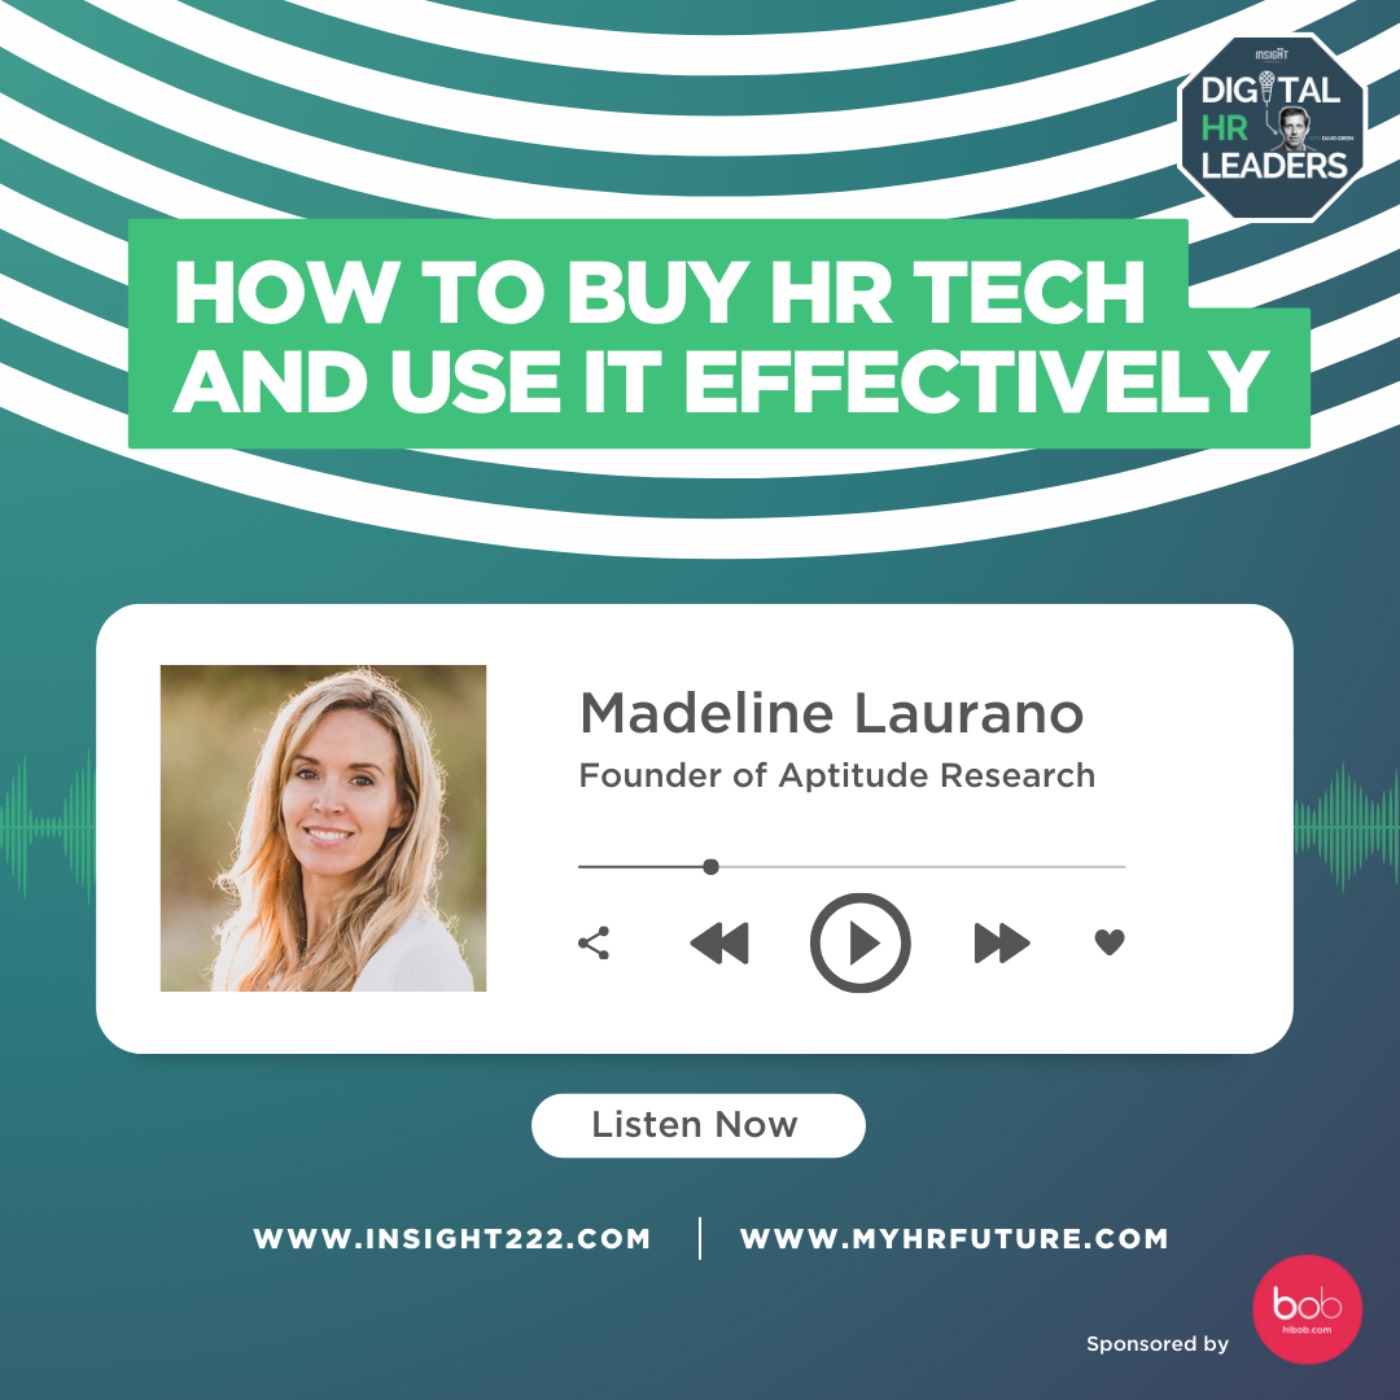 How to Buy HR Tech and Use It Effectively